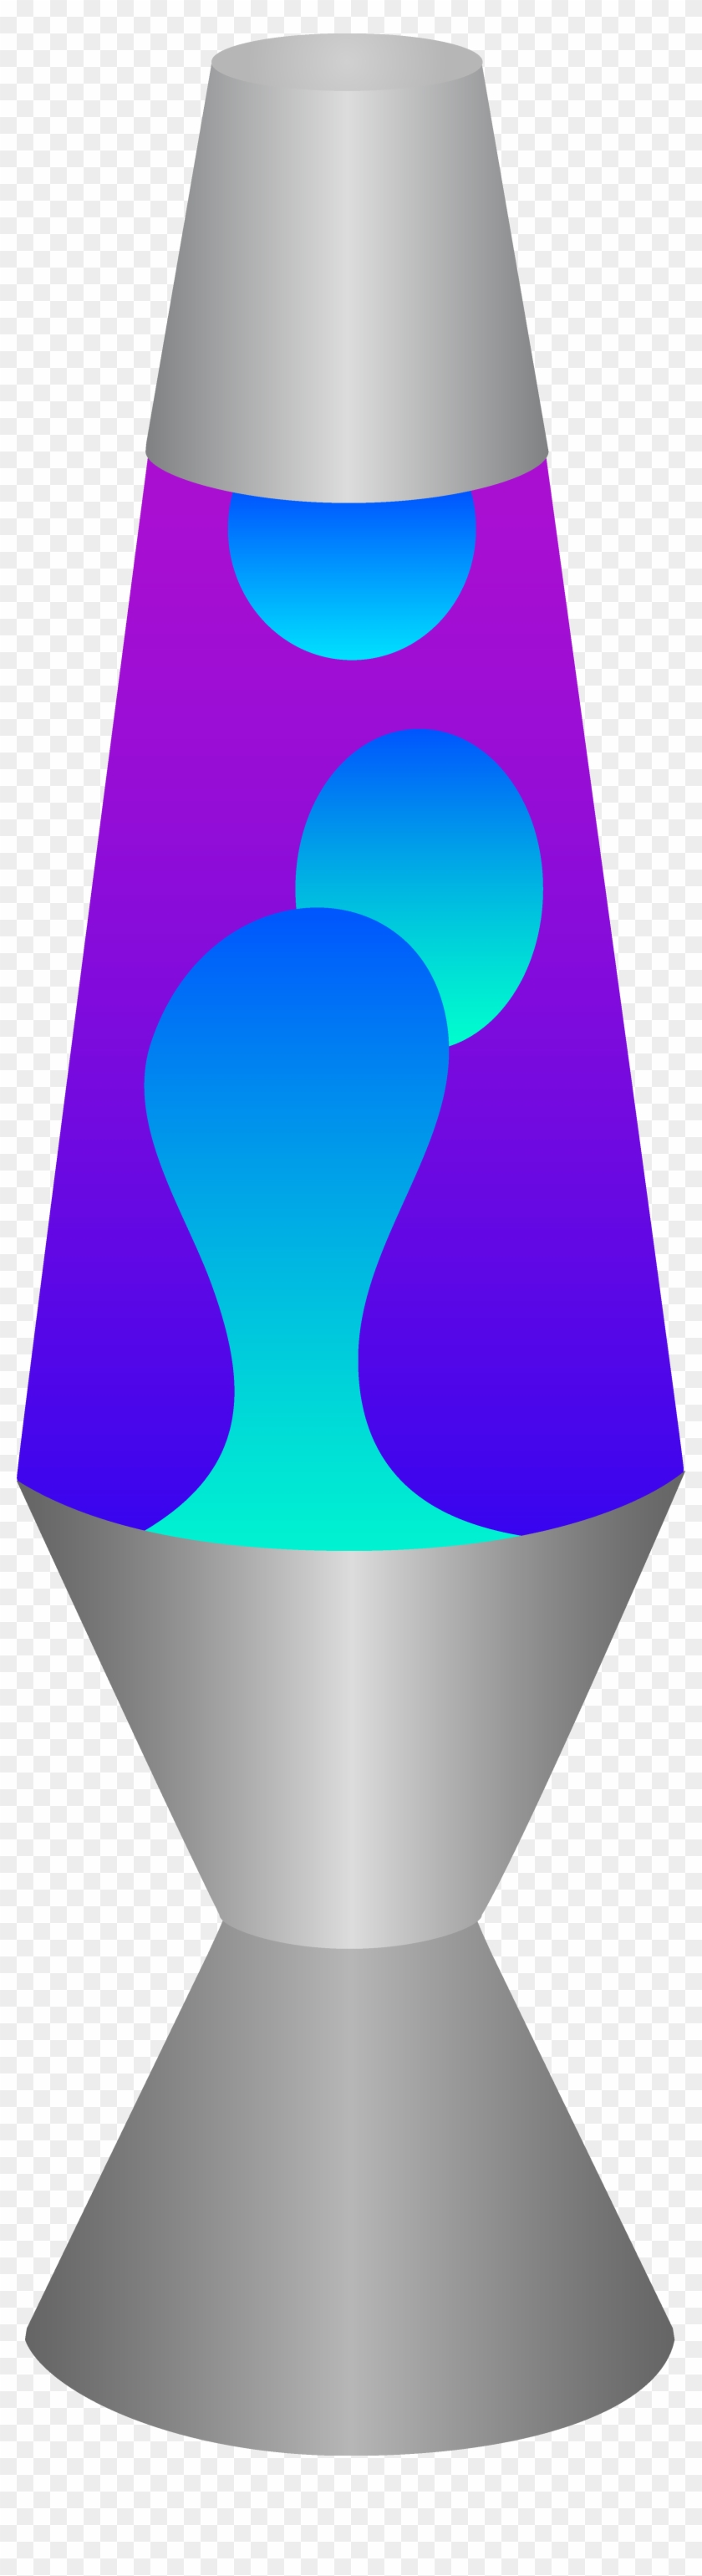 Lava Free On Dumielauxepices Net - Purple And Teal Lava Lamp Clipart #2511934